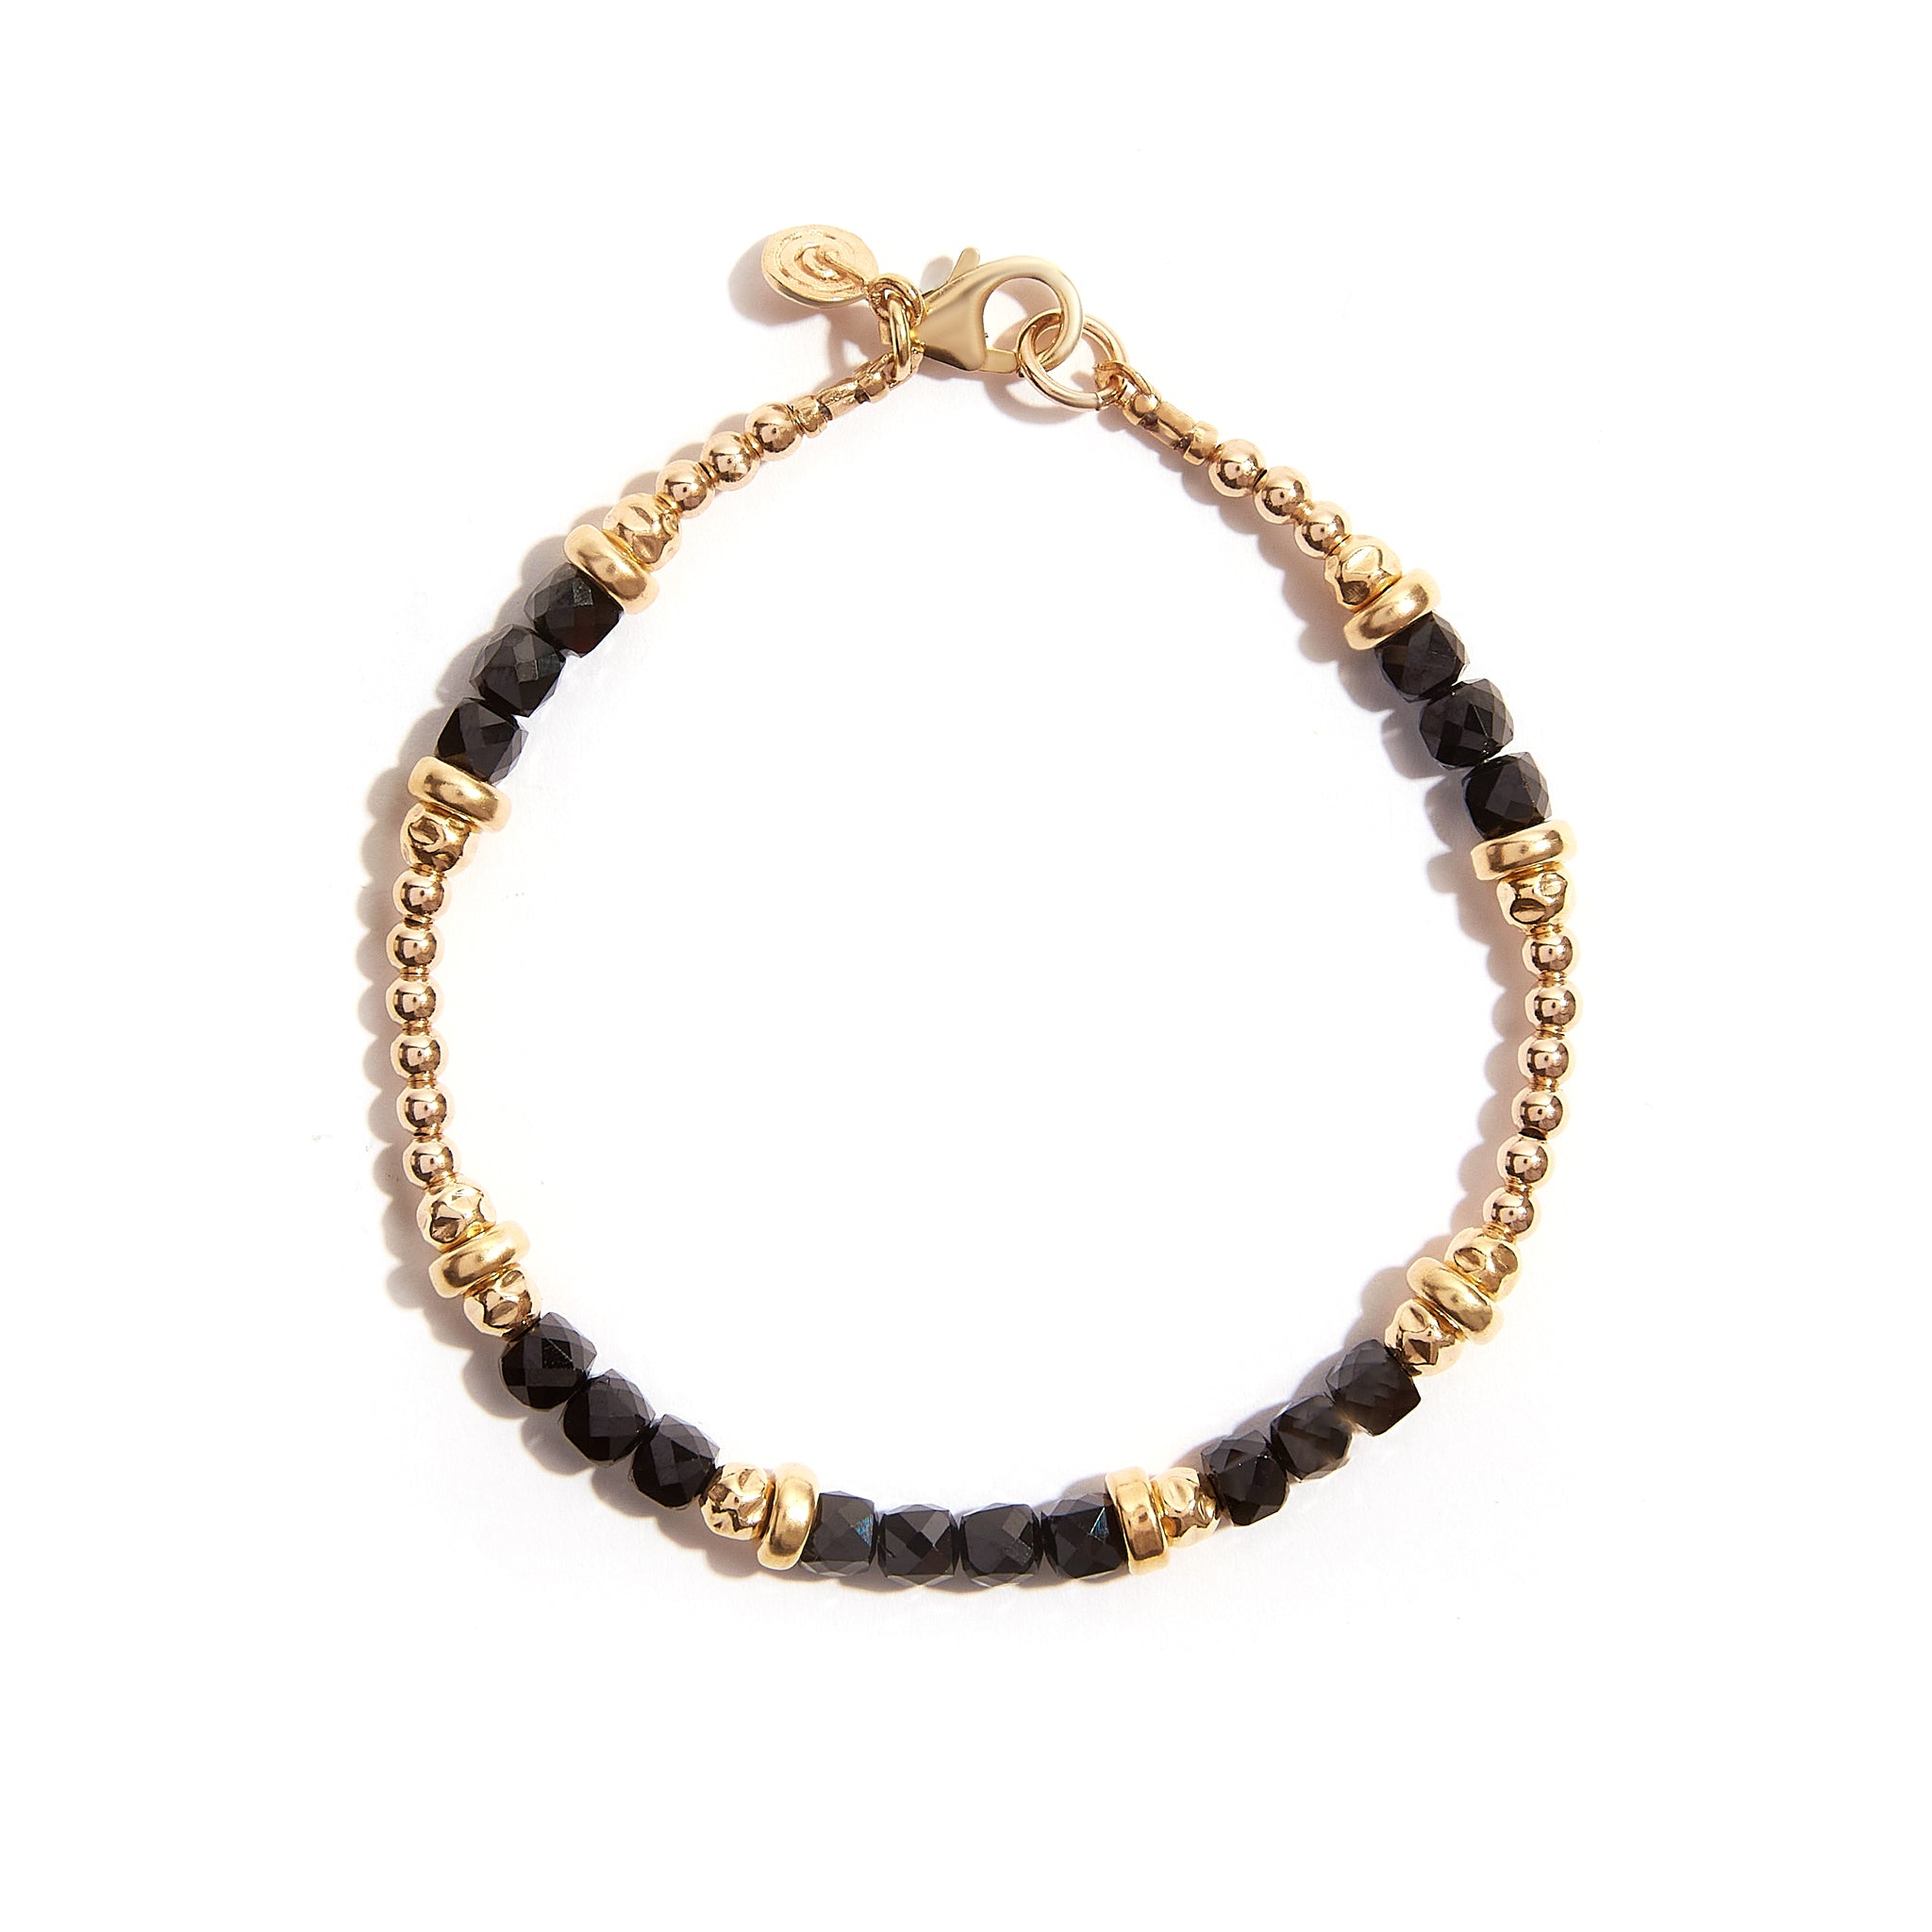 Introducing our mesmerizing Sparkling Spinel Faceted Bracelet, a stunning fusion of black and gold. This exquisite piece exudes elegance and sophistication, with its captivating contrast and brilliant sparkle. Material: Crafted from exquisite Gold Filled, ensuring durability and timeless elegance. Length: Measures 7 inches, offering a comfortable fit for most wrists.